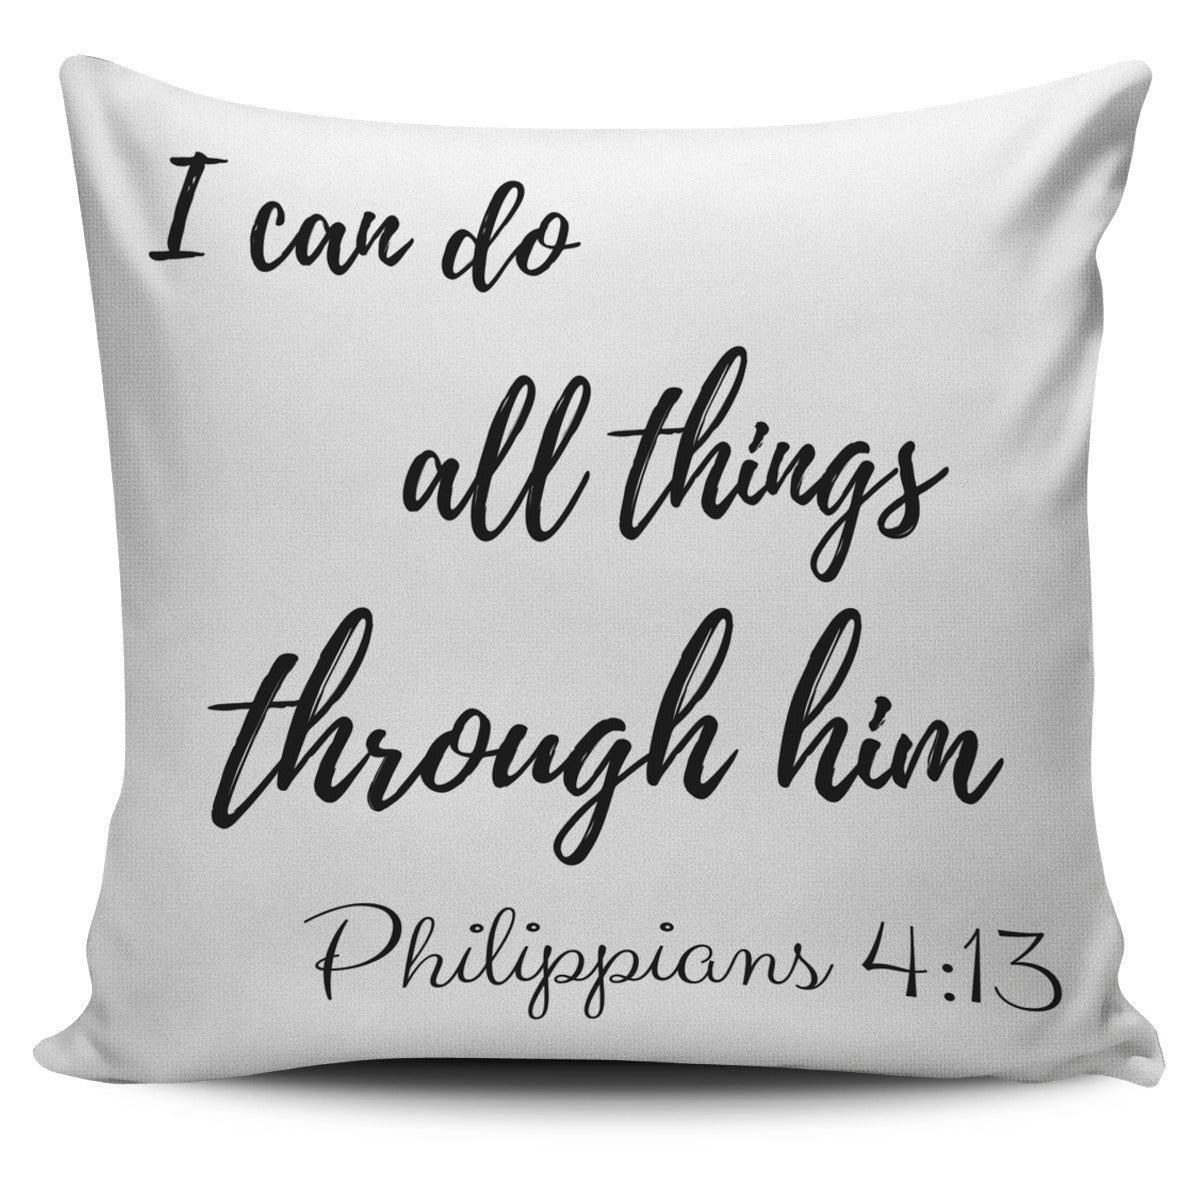 I Can Do All Things Through Him Pillow Cover